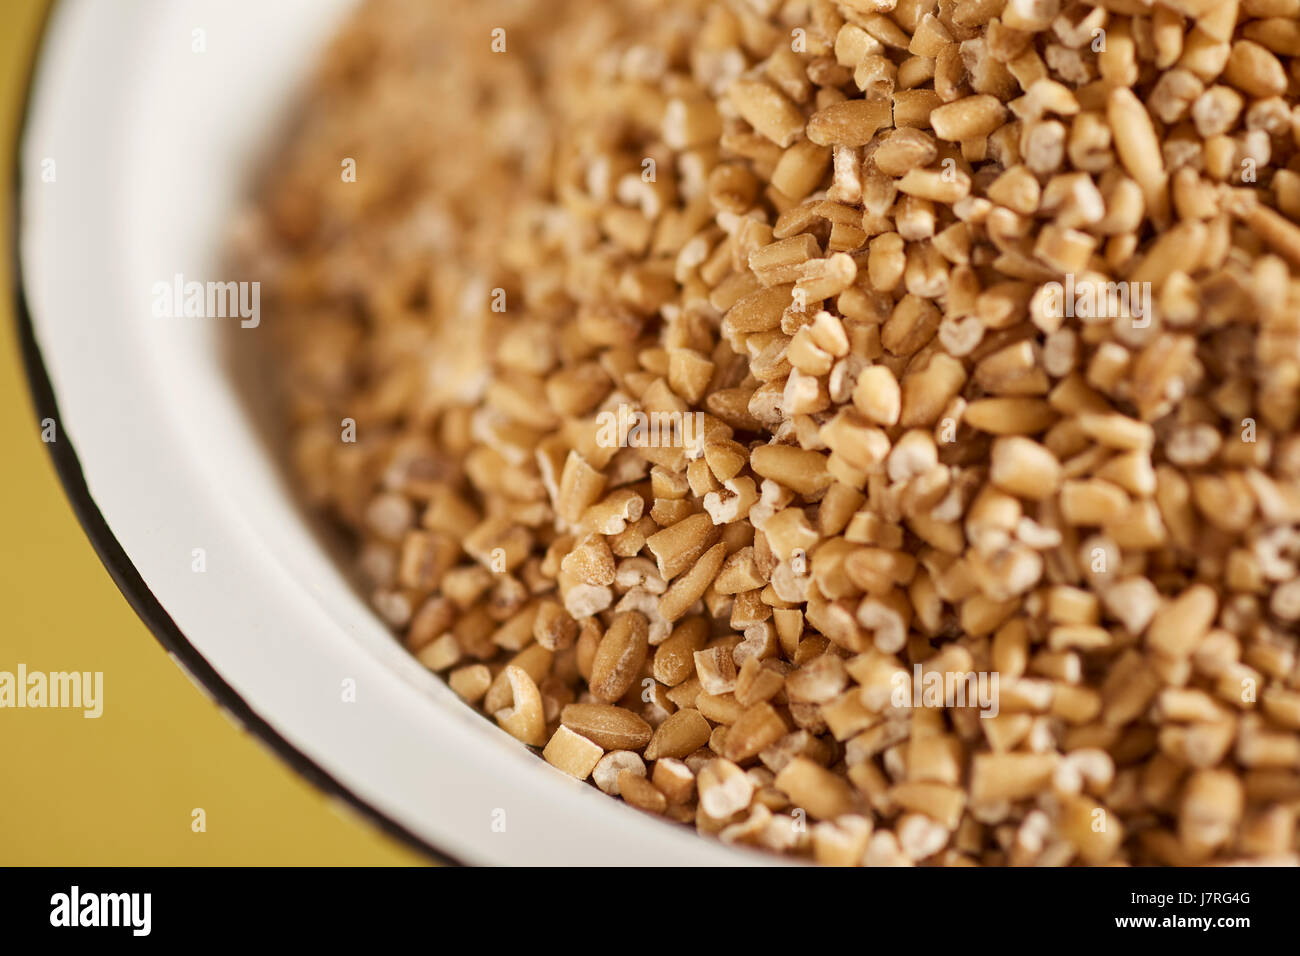 uncooked pinhead oats, also called steel cut oats Stock Photo